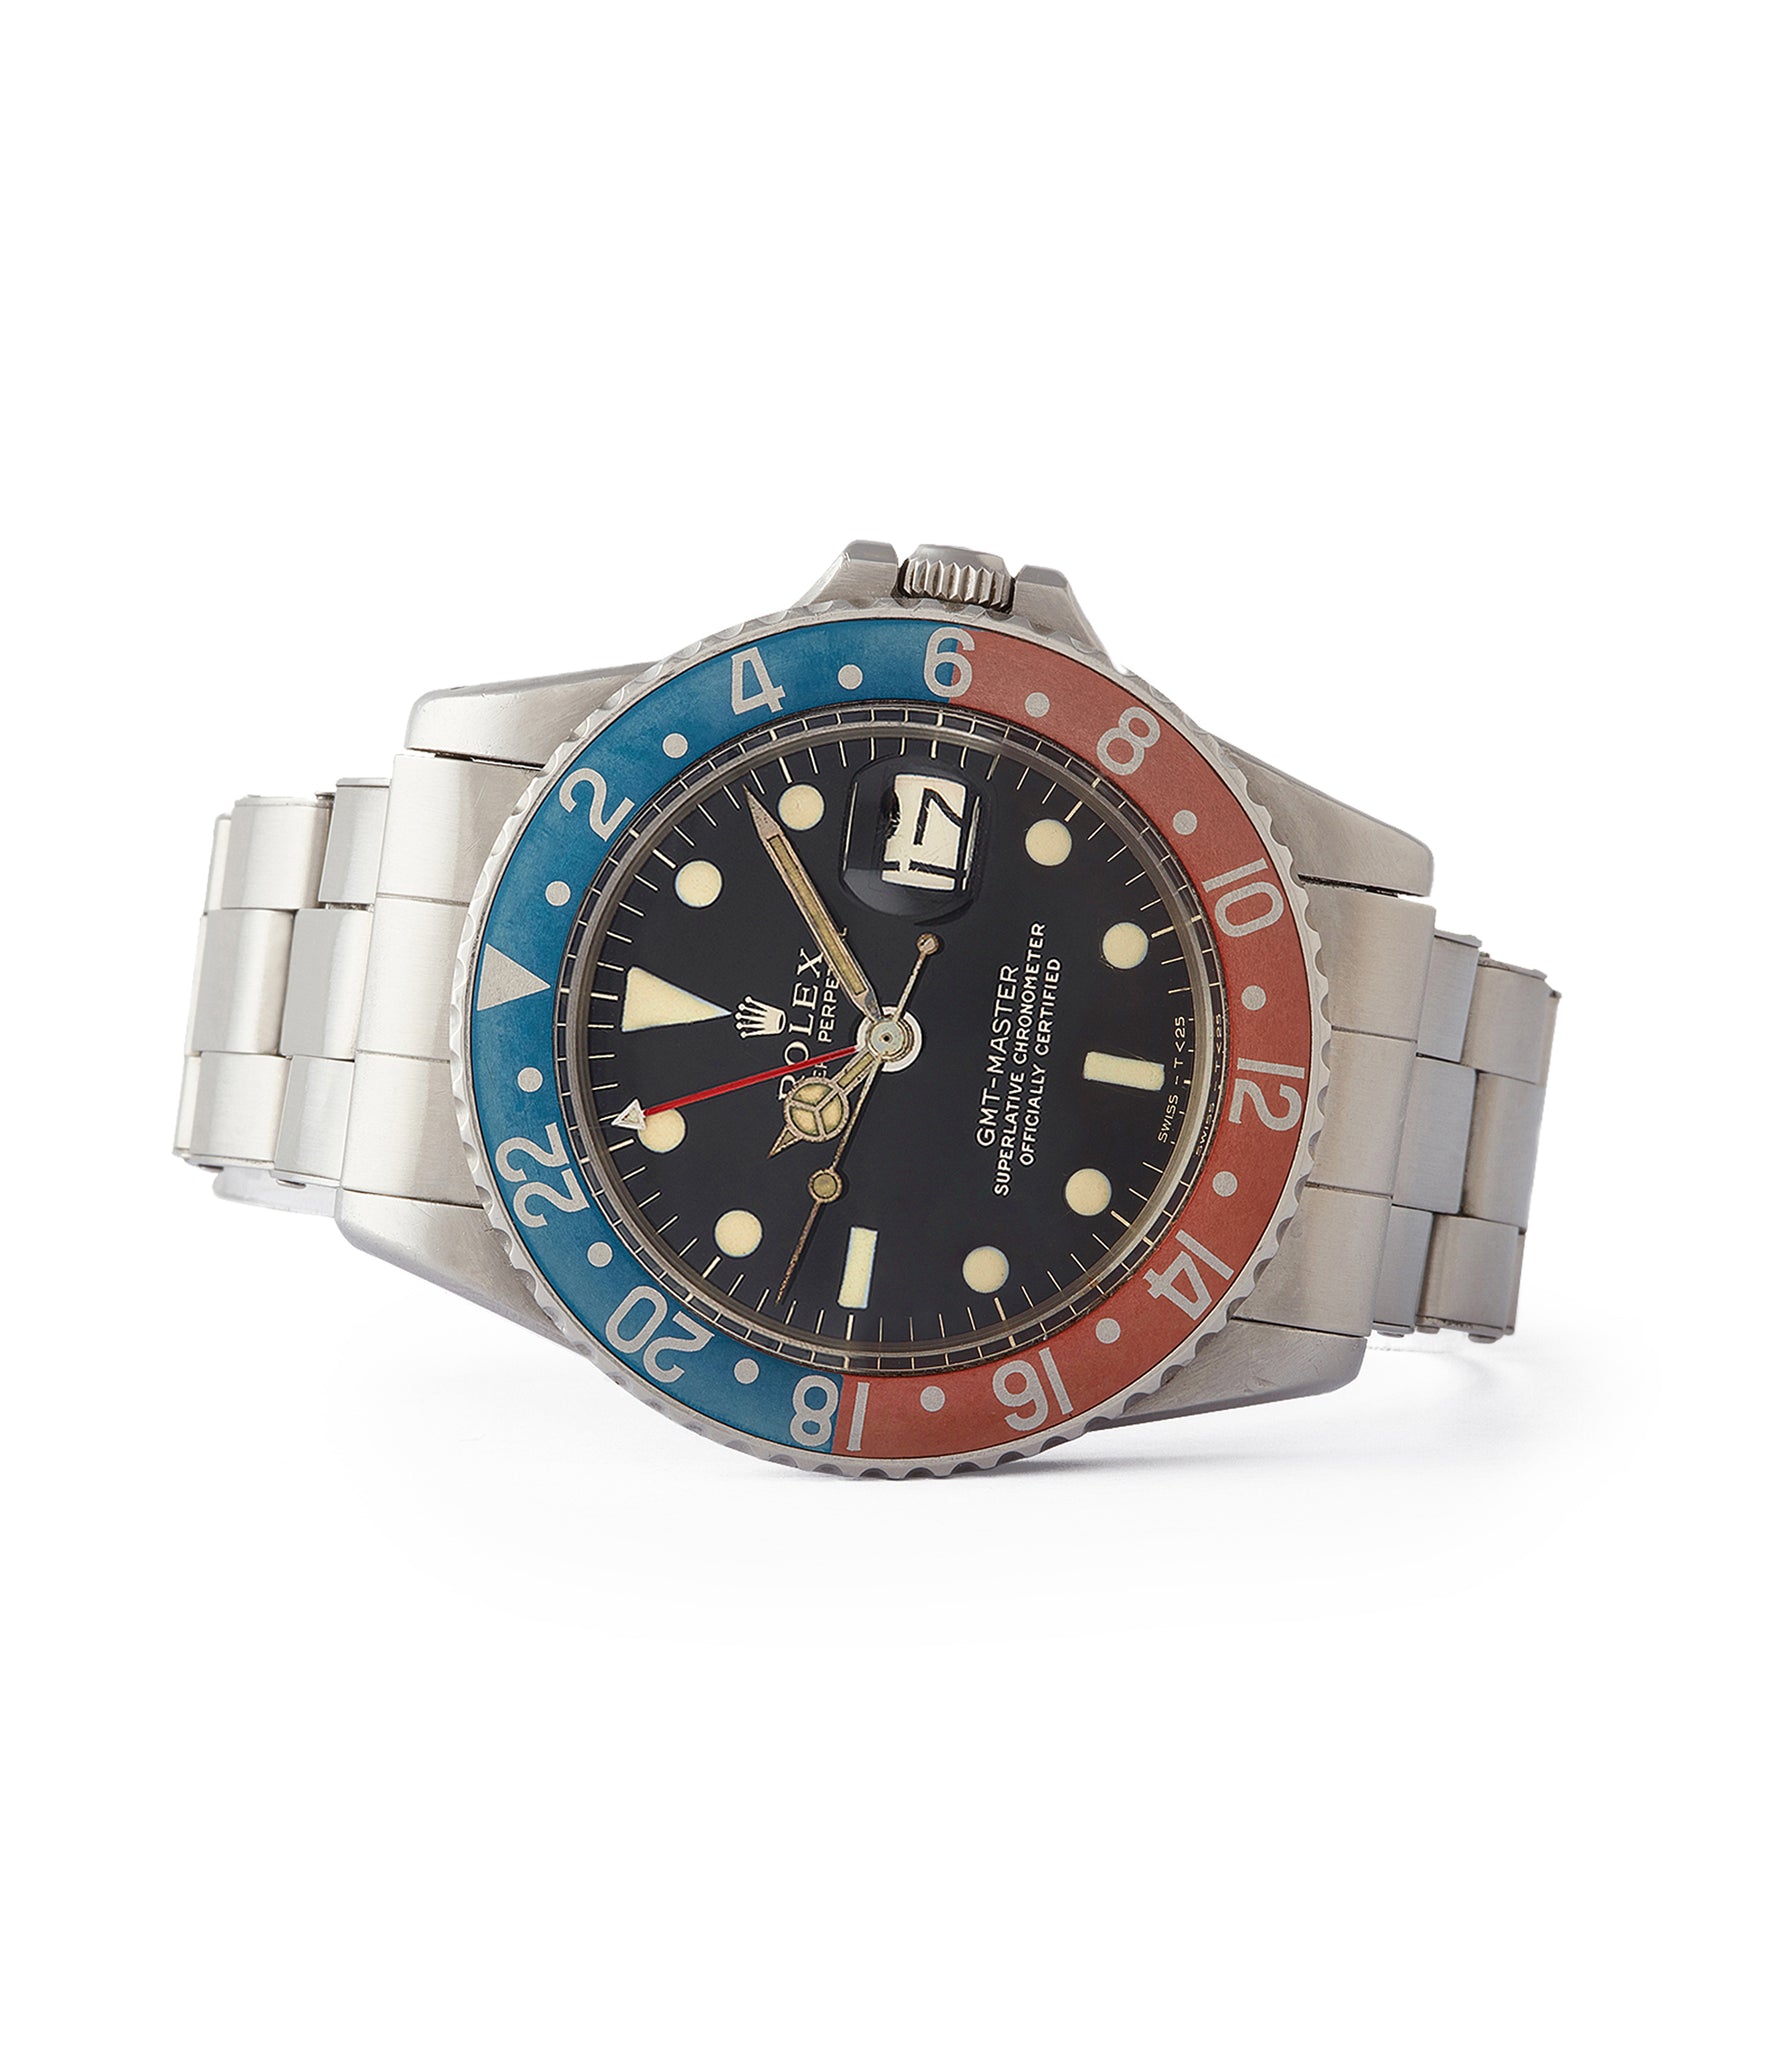 side-shot Rolex GMT-Master Pepsi bezel 1675 Gilt dial full set sports watch for sale online at A Collected Man London UK specialist of rare watches